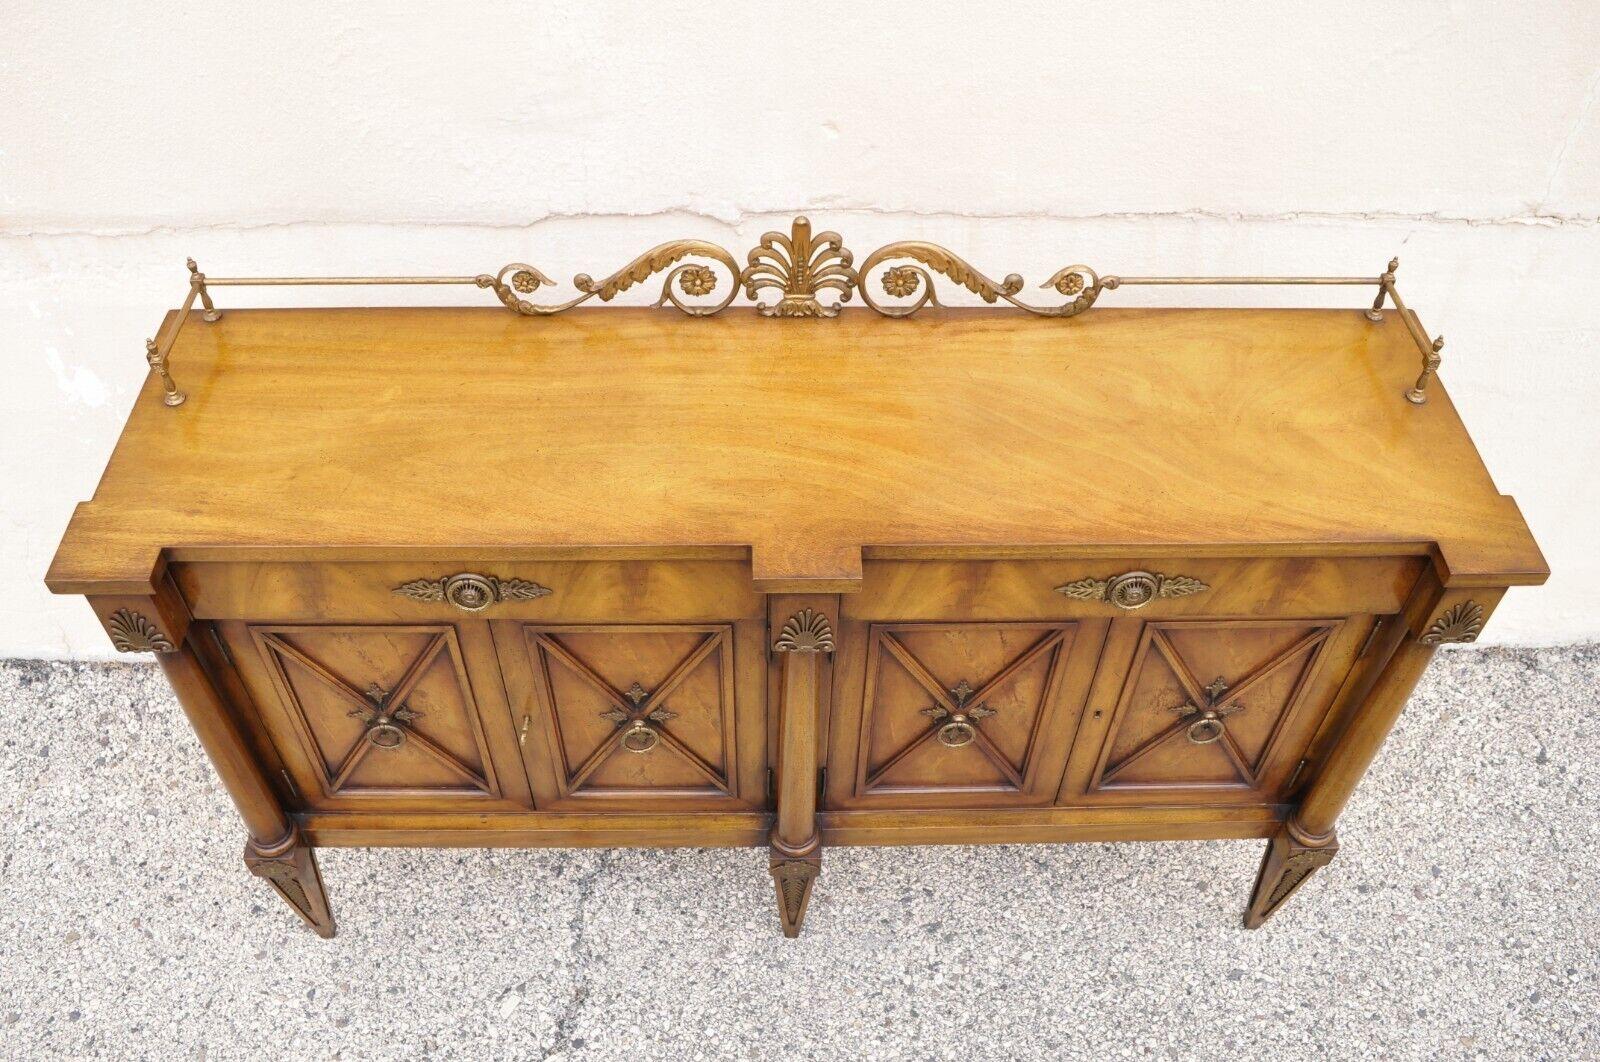 20th Century Karges Neoclassical Regency Style Mahogany Sideboard Buffet with Brass Ormolu